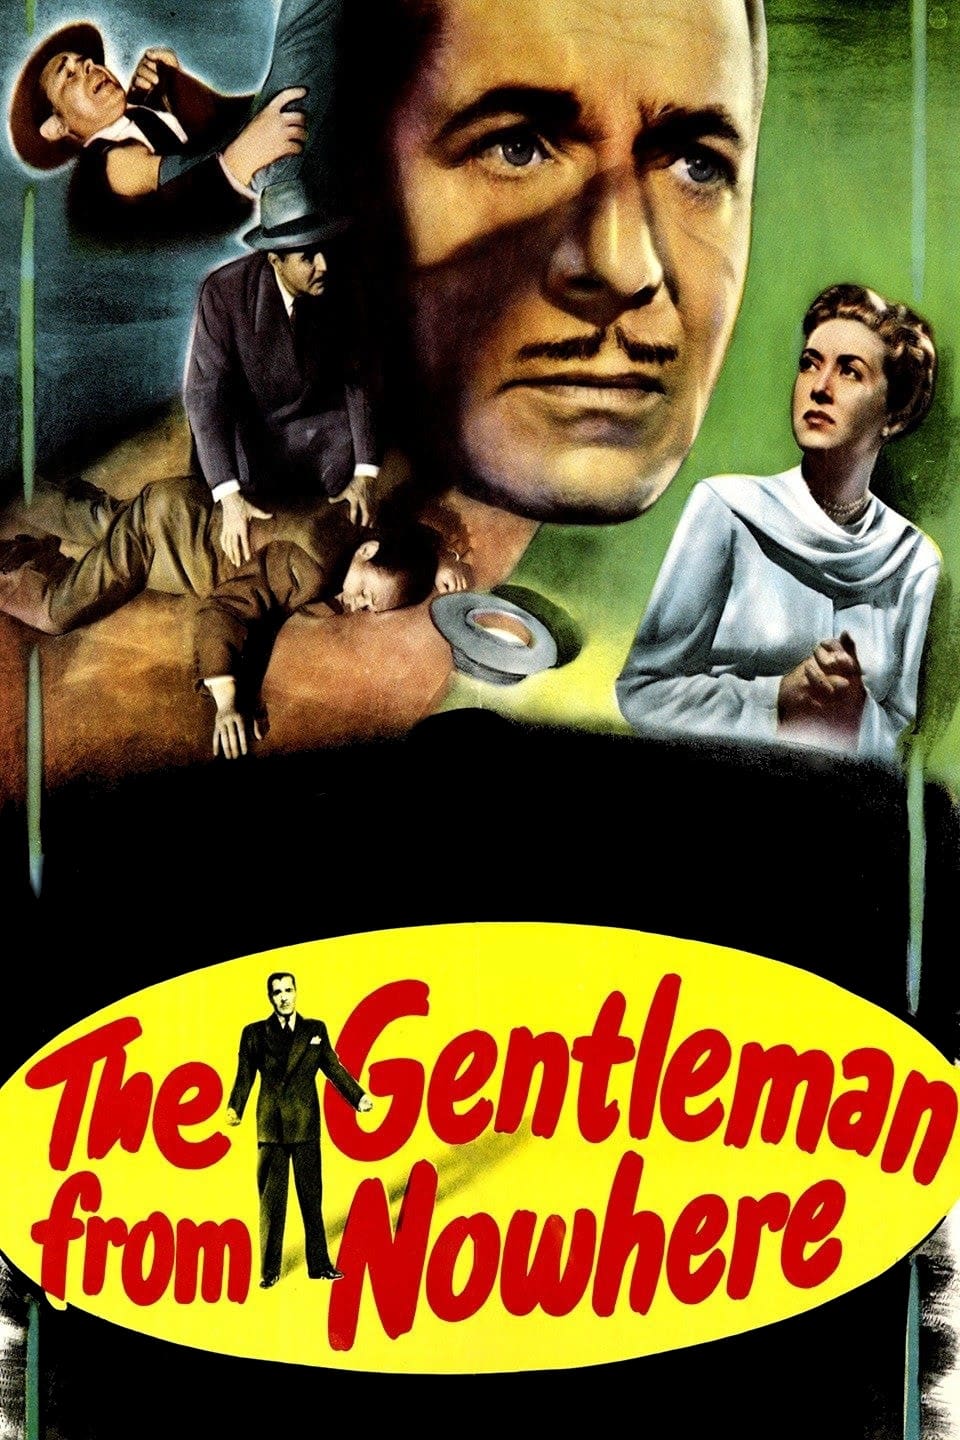 The Gentleman from Nowhere